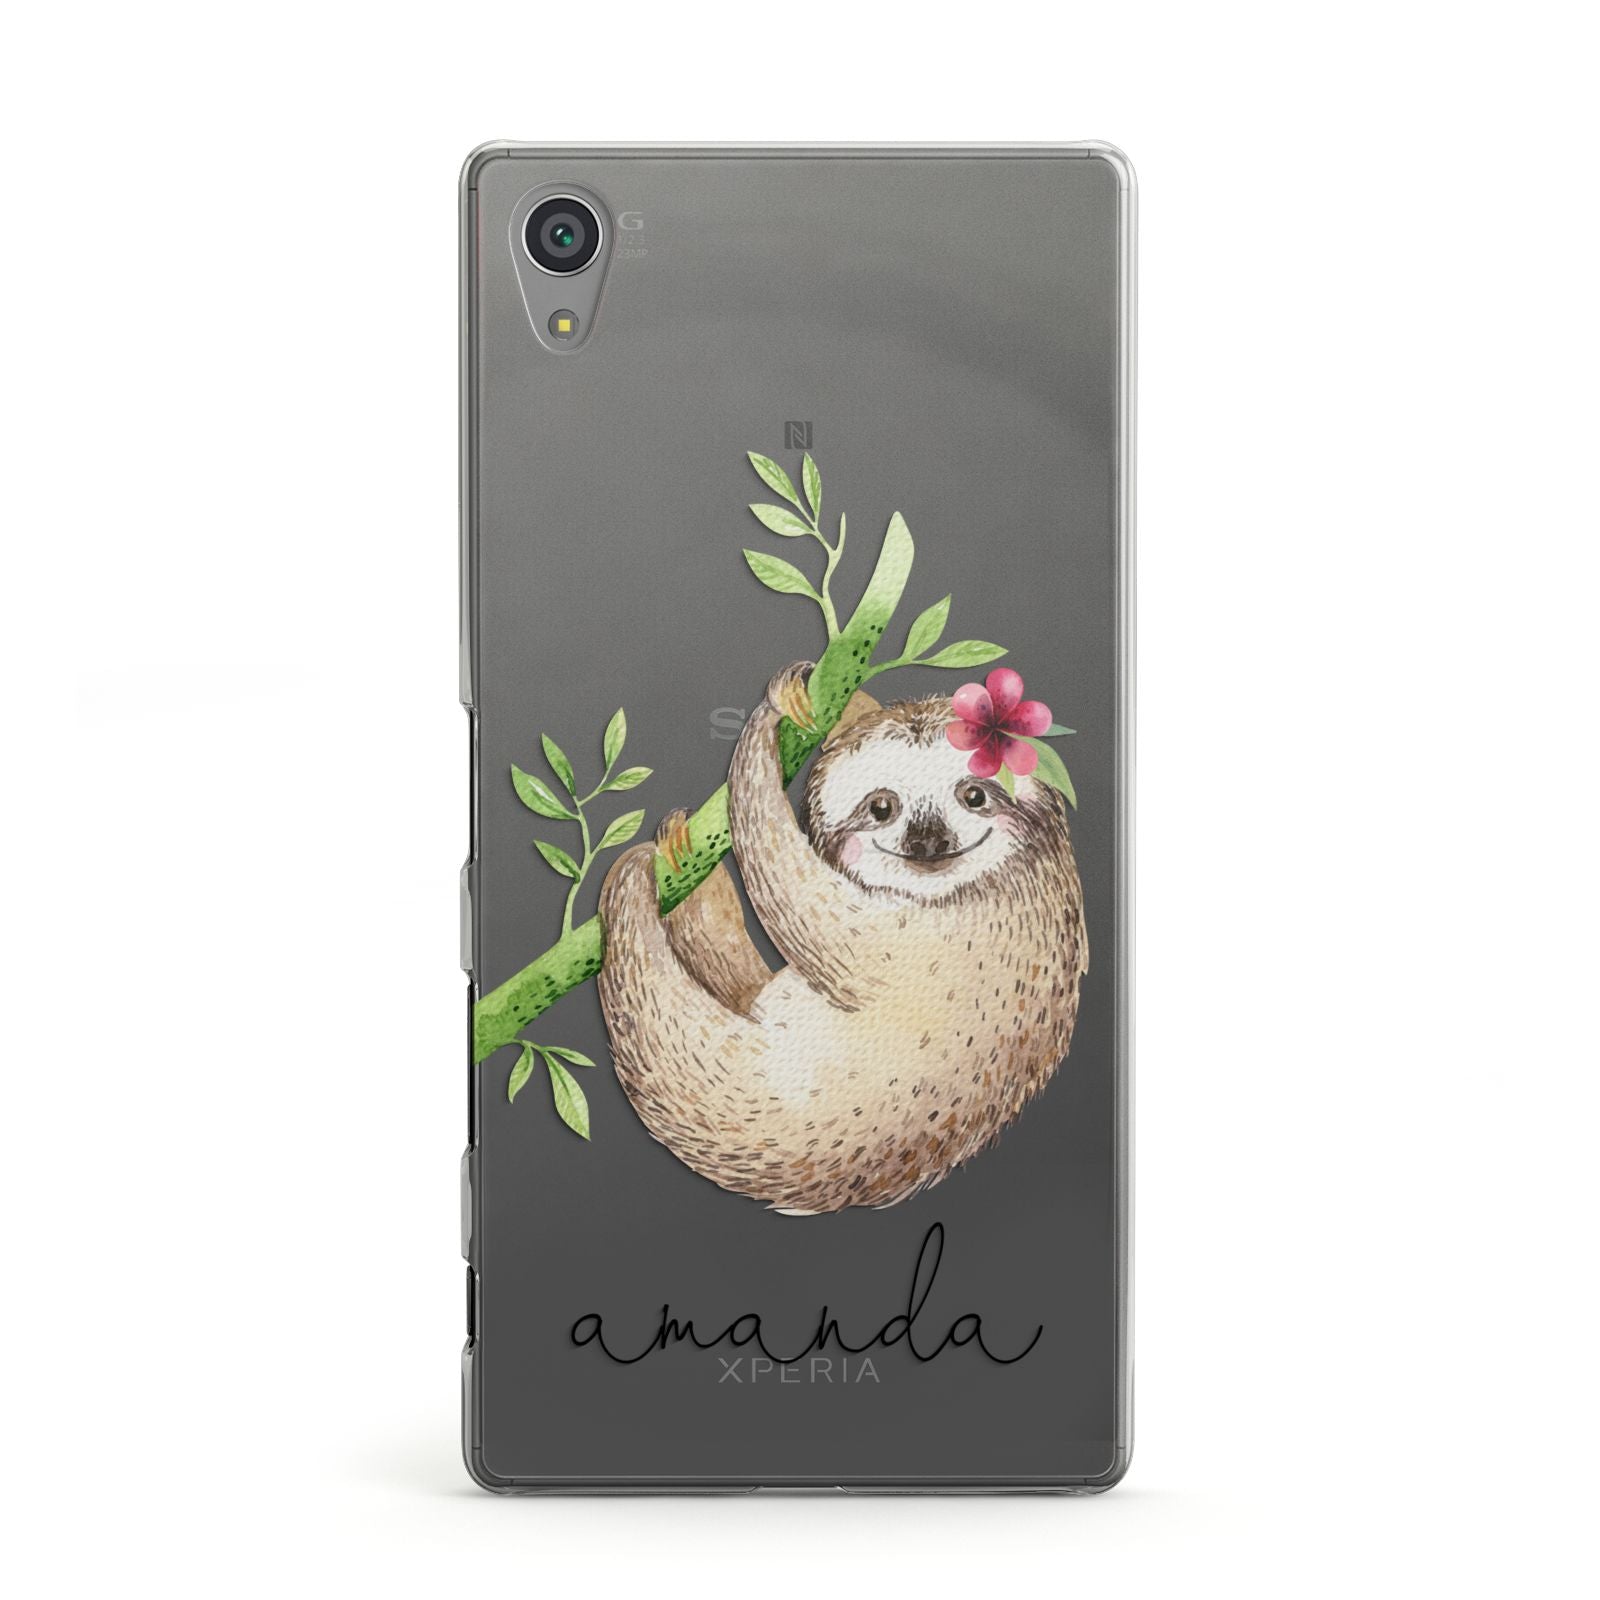 Personalised Sloth Sony Xperia Case